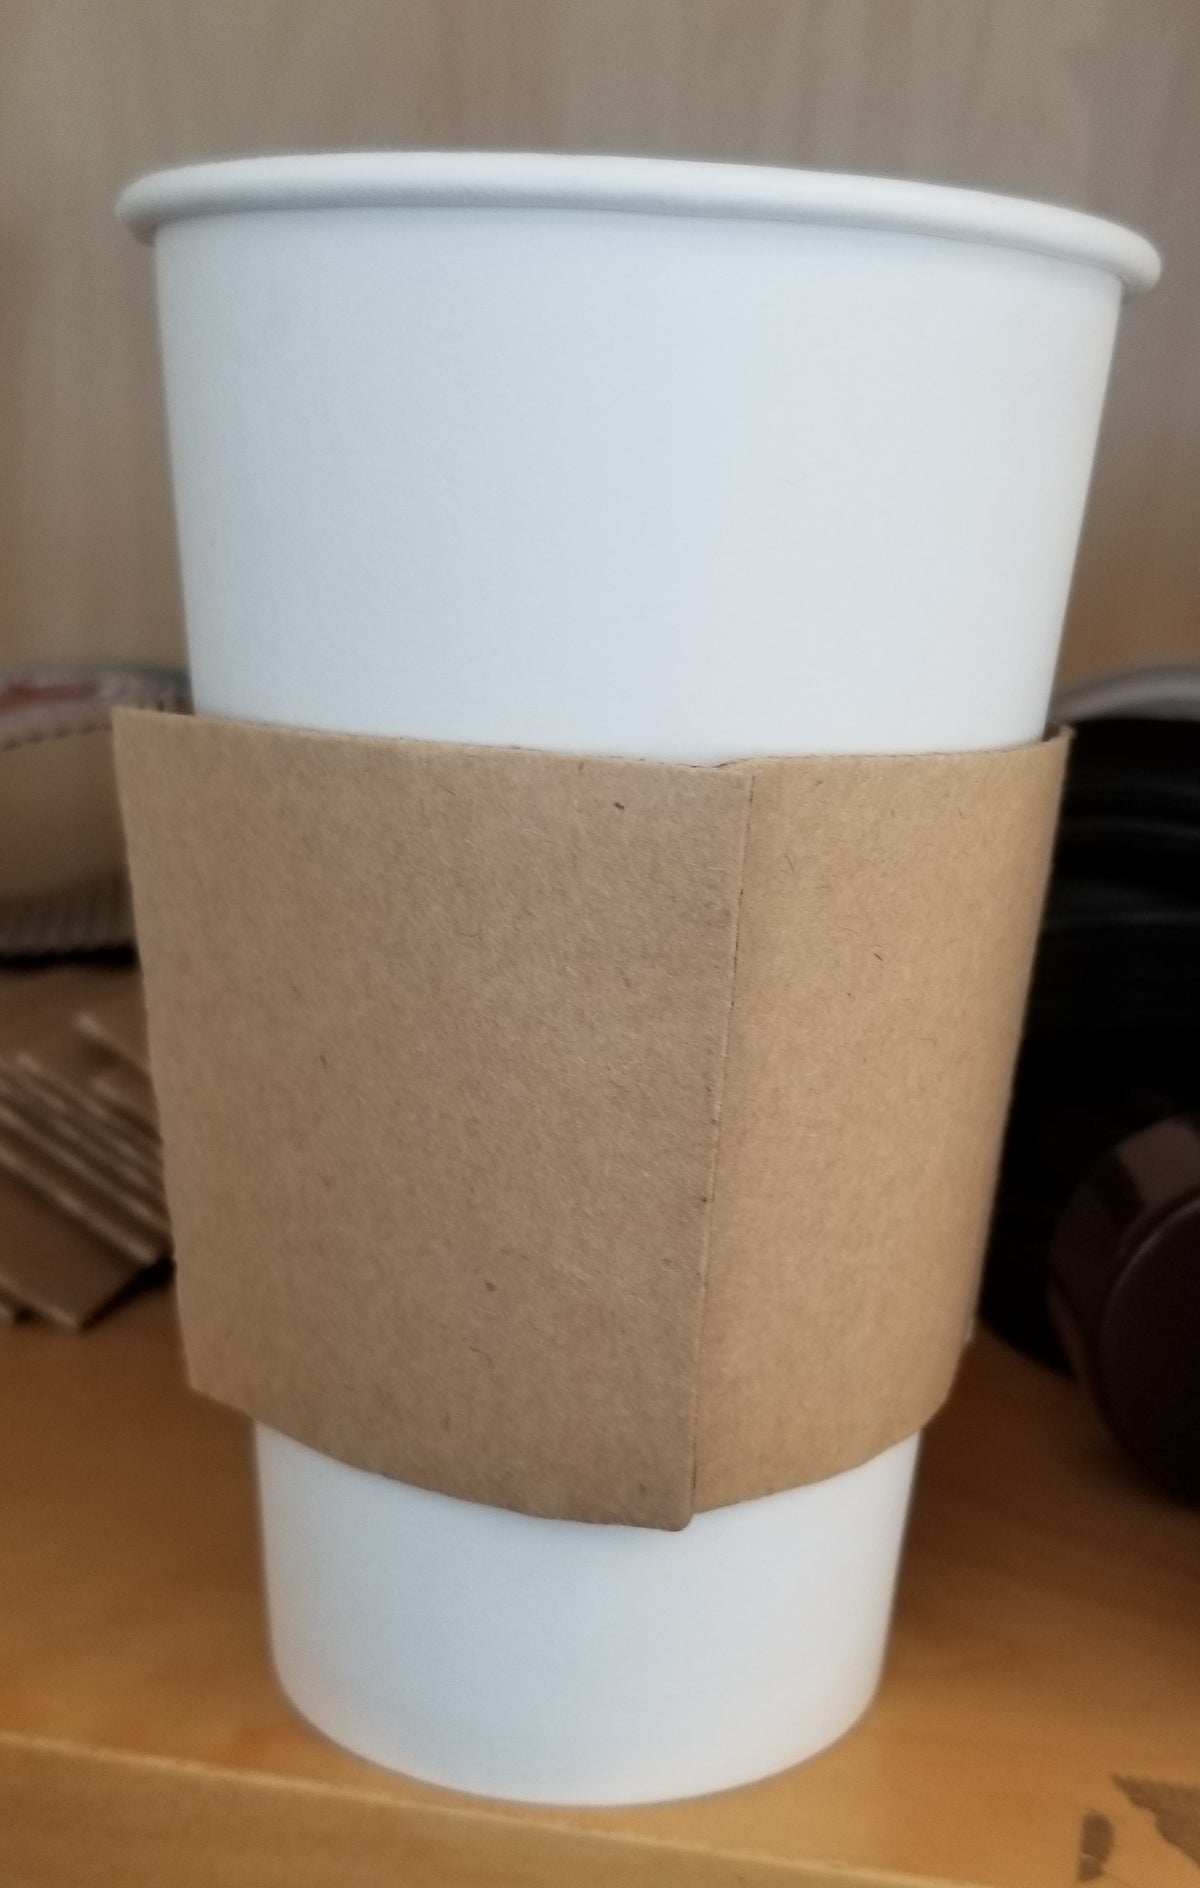 Hot Drink Paper Cups: 16 & 12 Ounces, and Covers